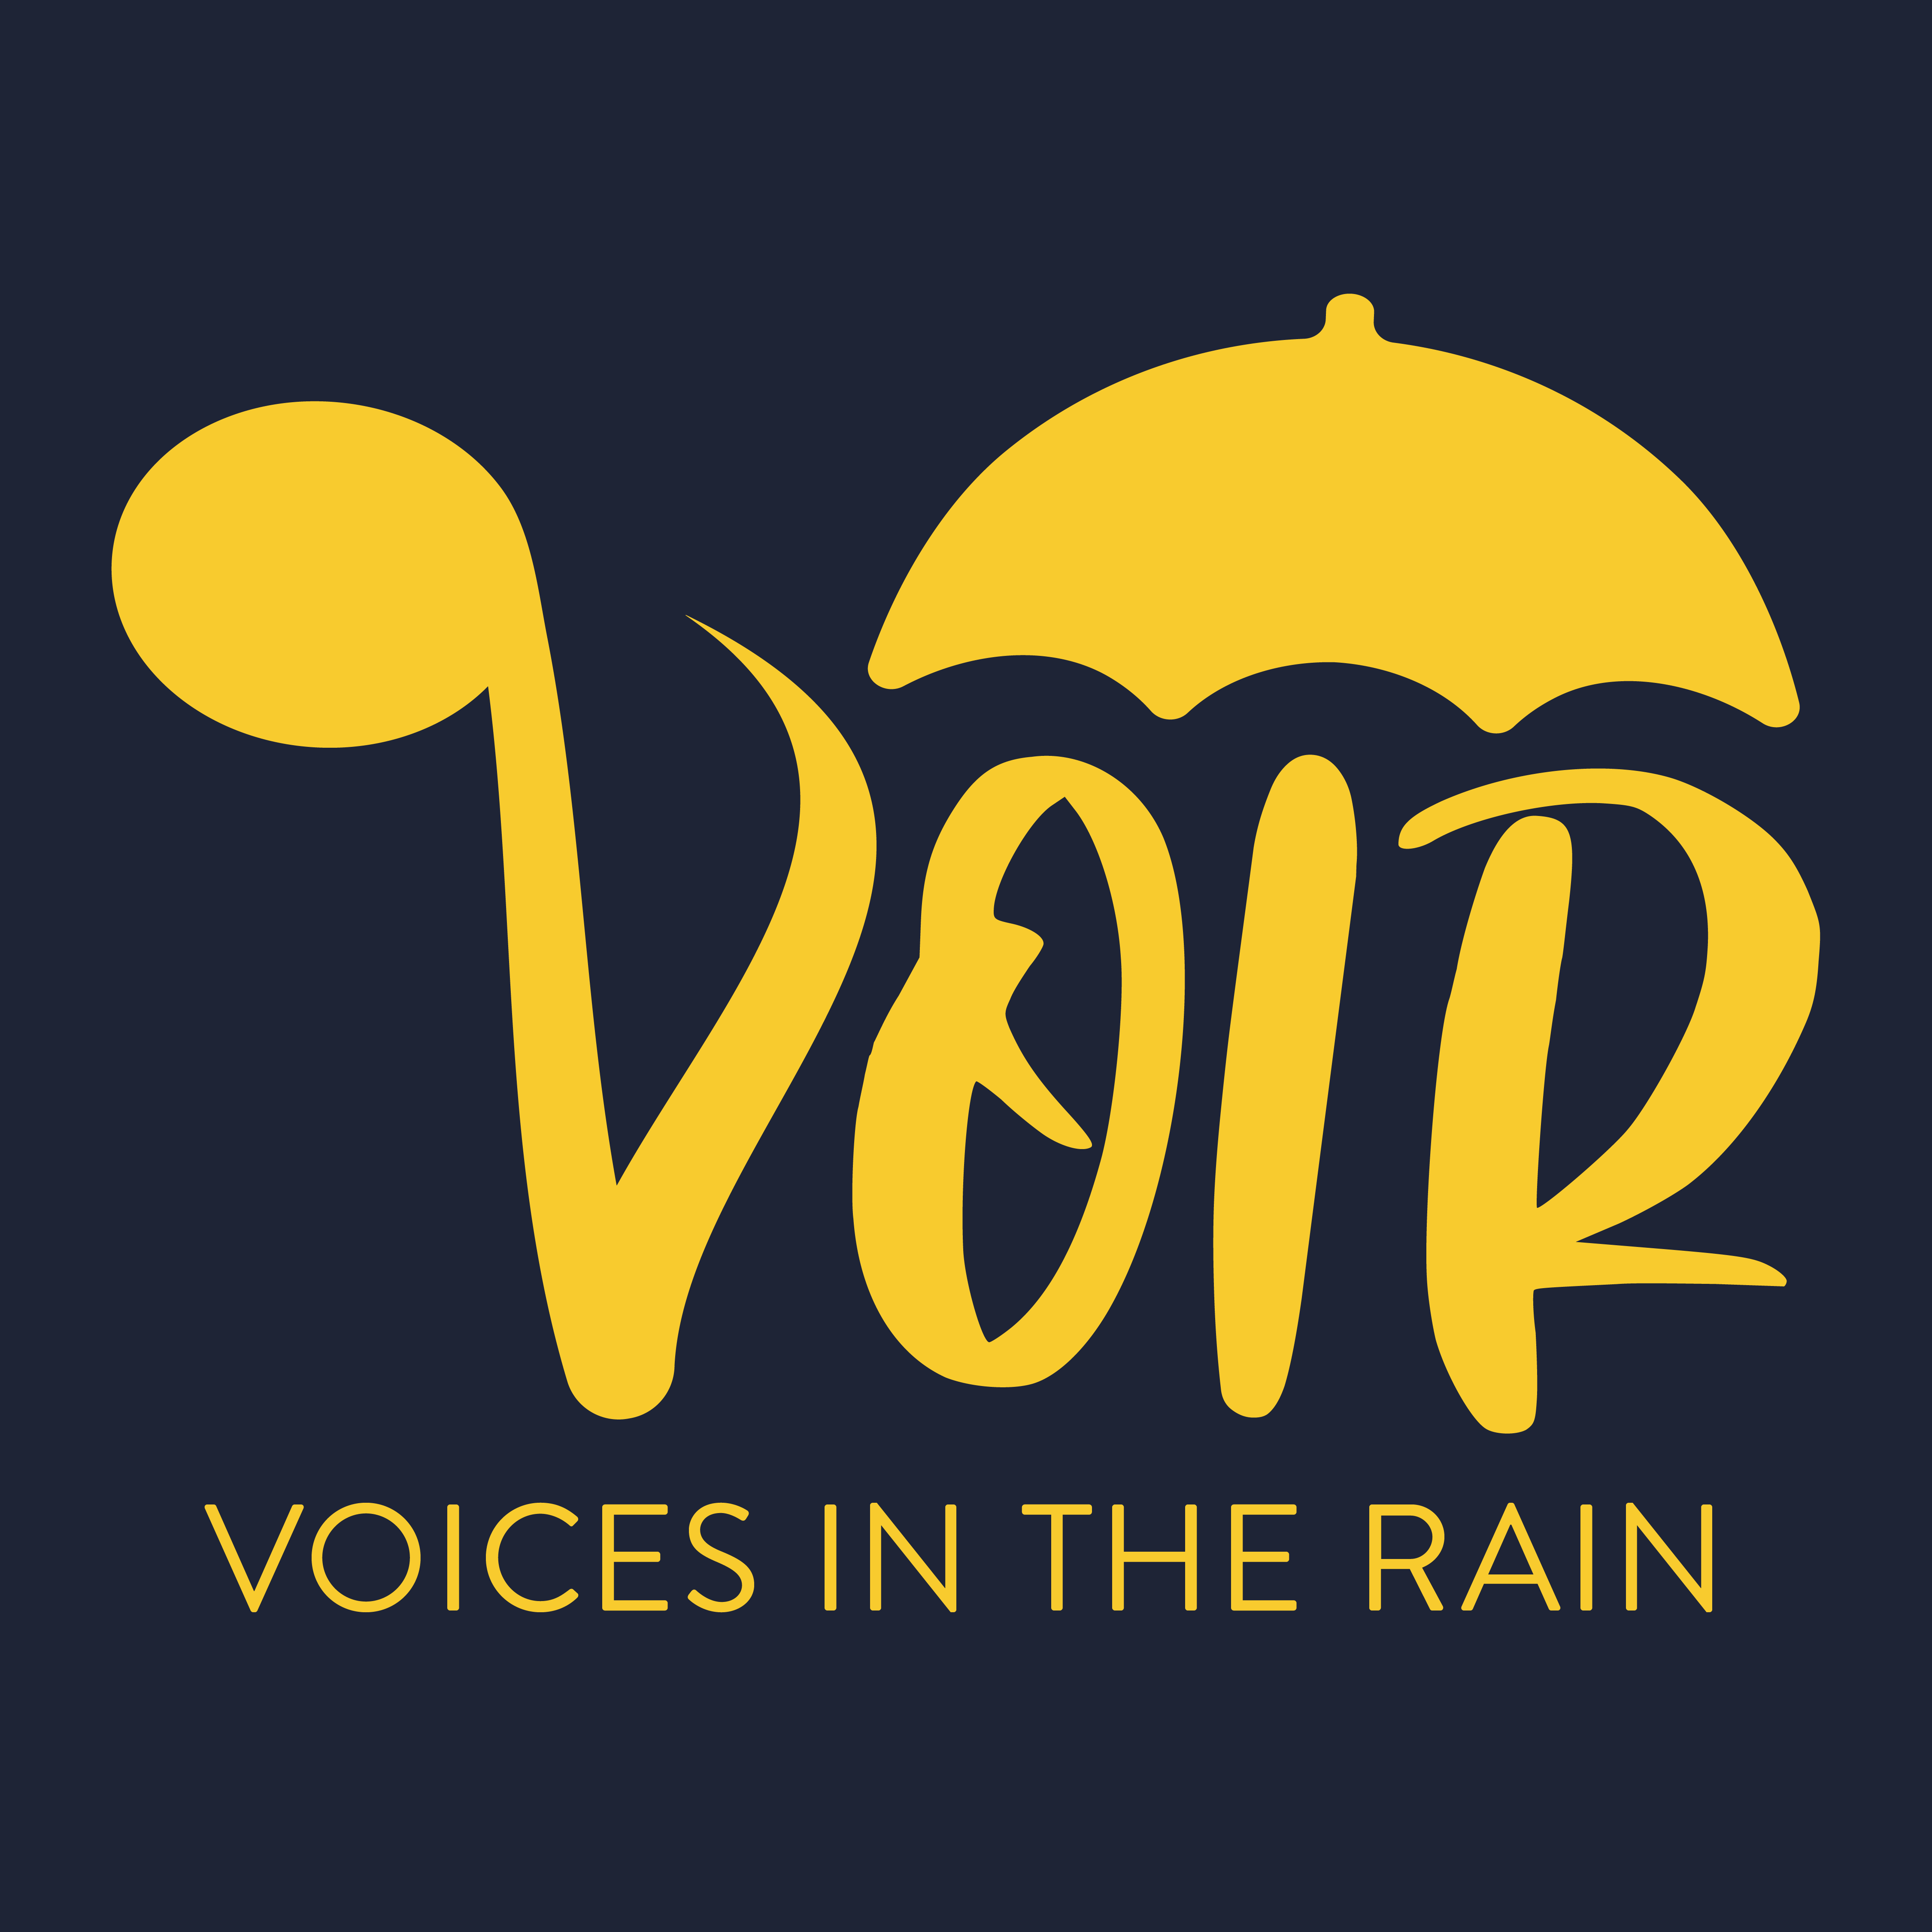 Voices in the Rain